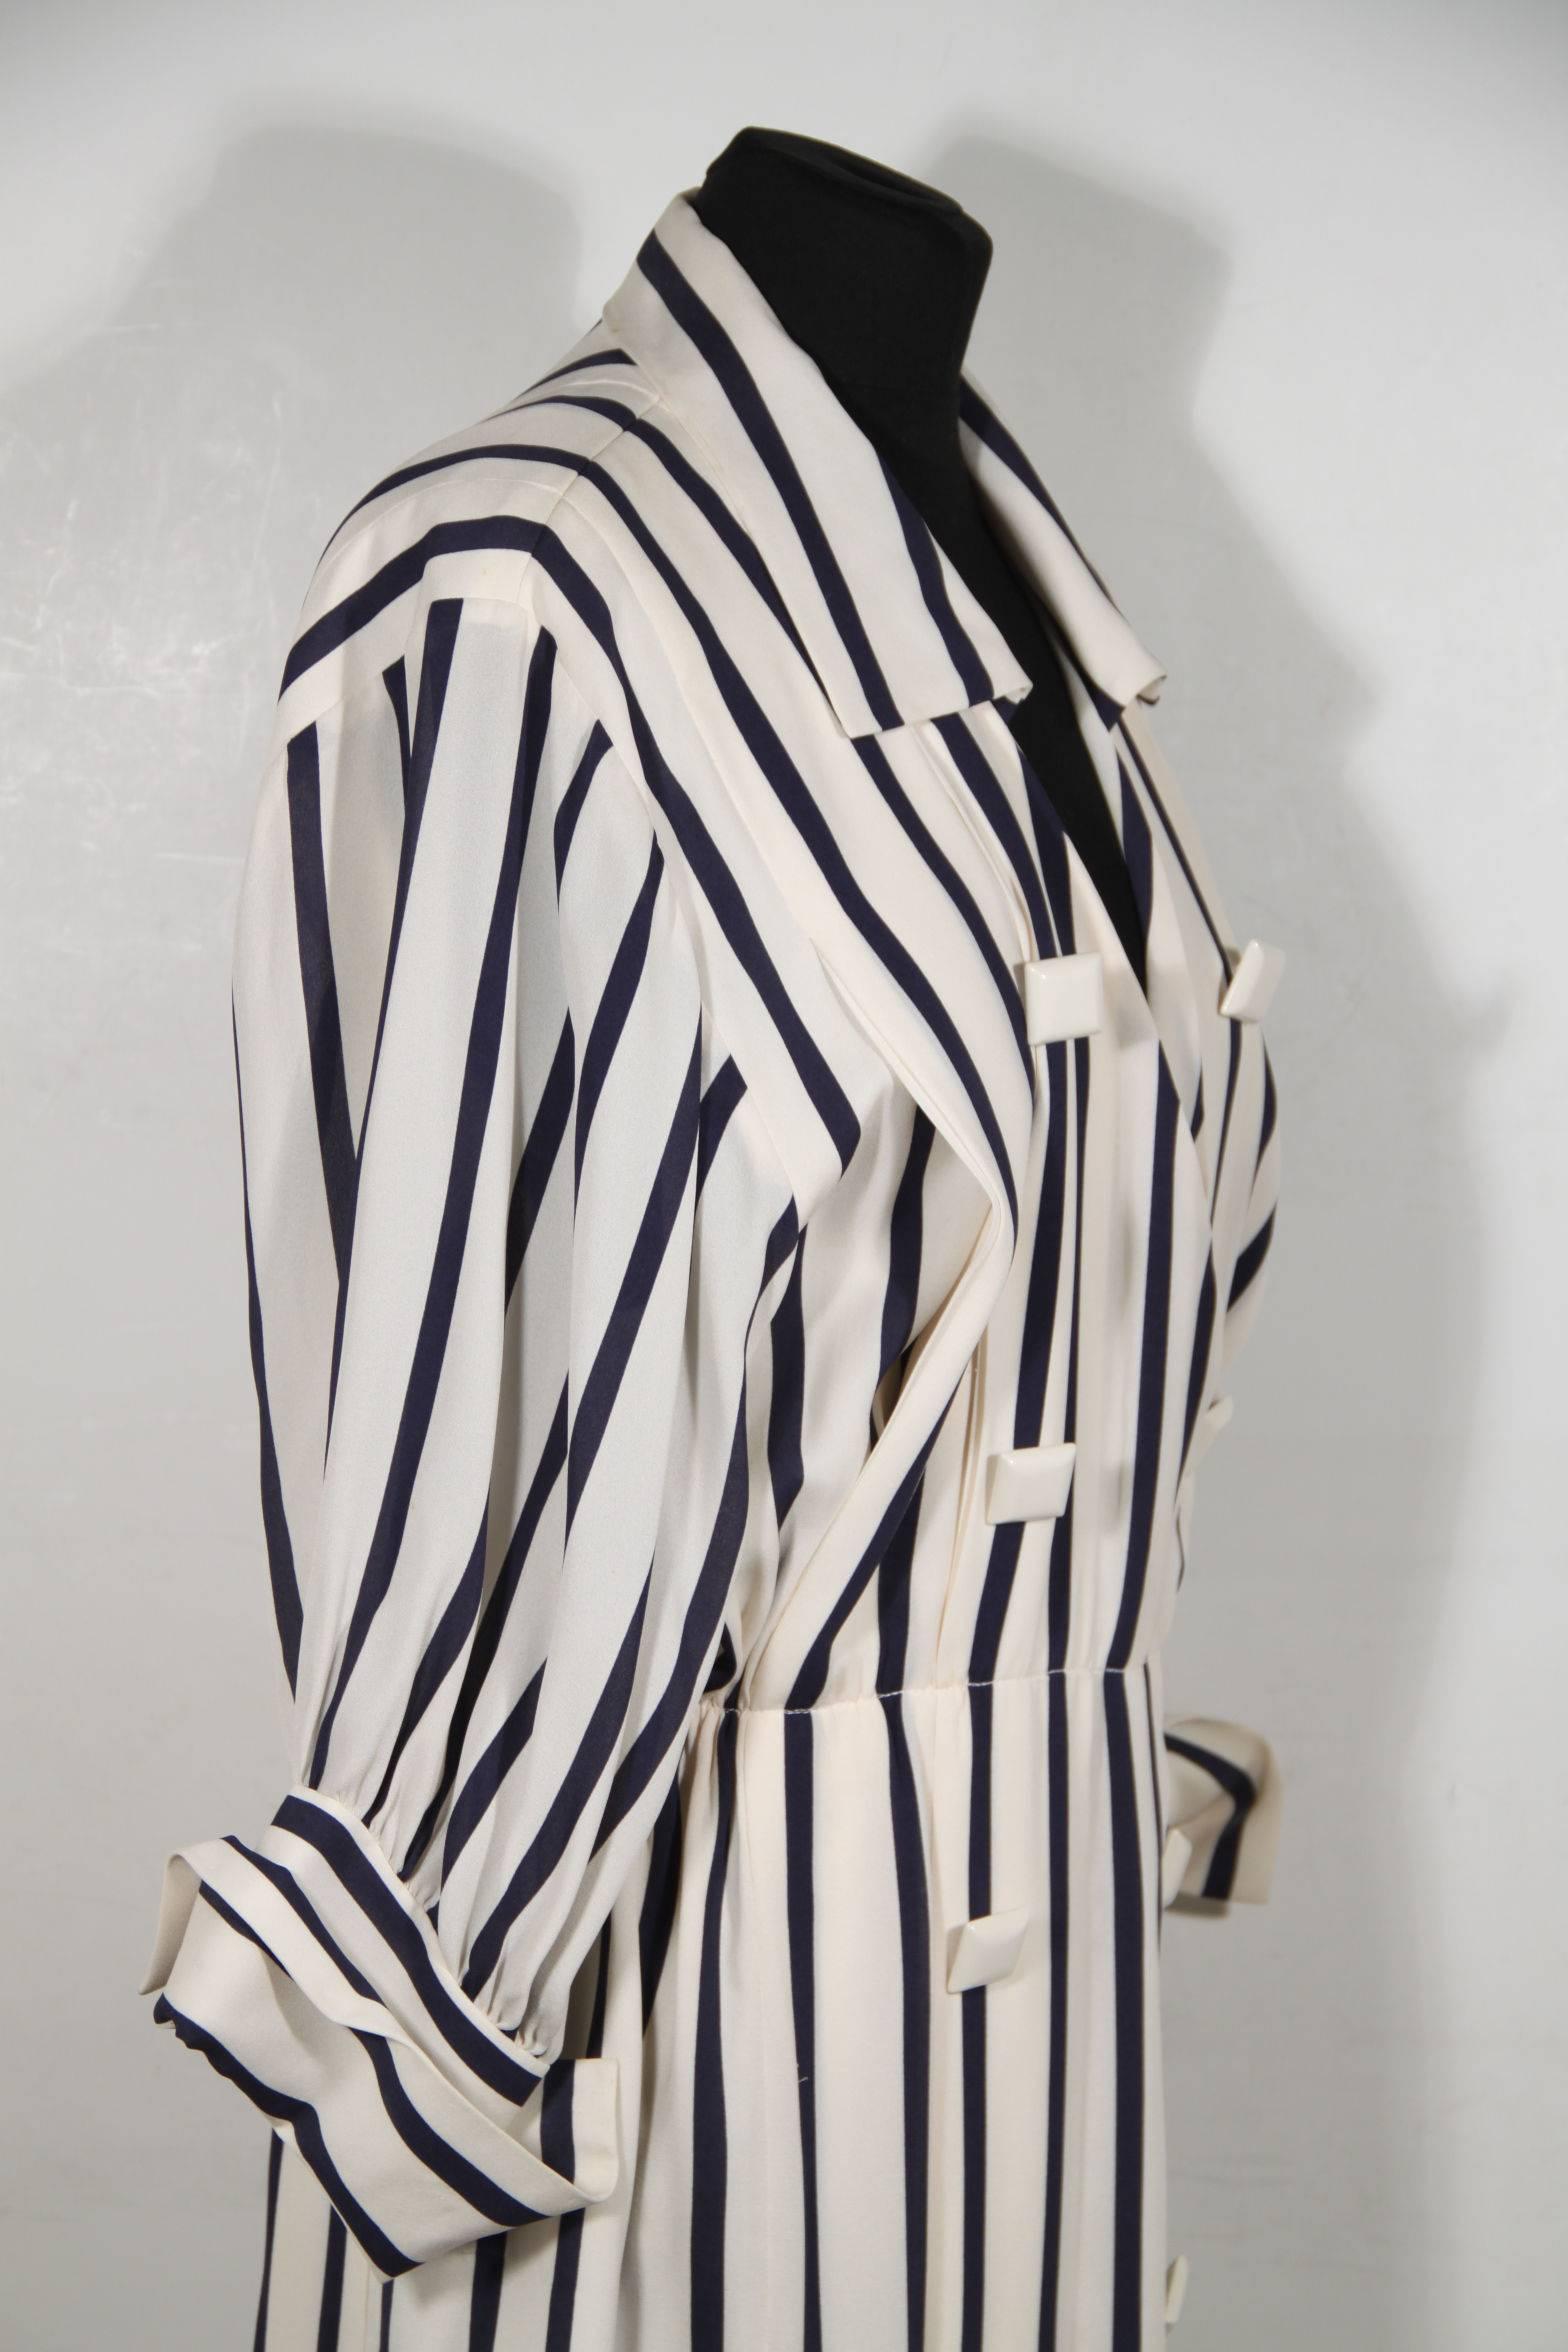 Women's Andrea Odicini Italian Authentic Vintage White and Navy Striped Shirt Dress